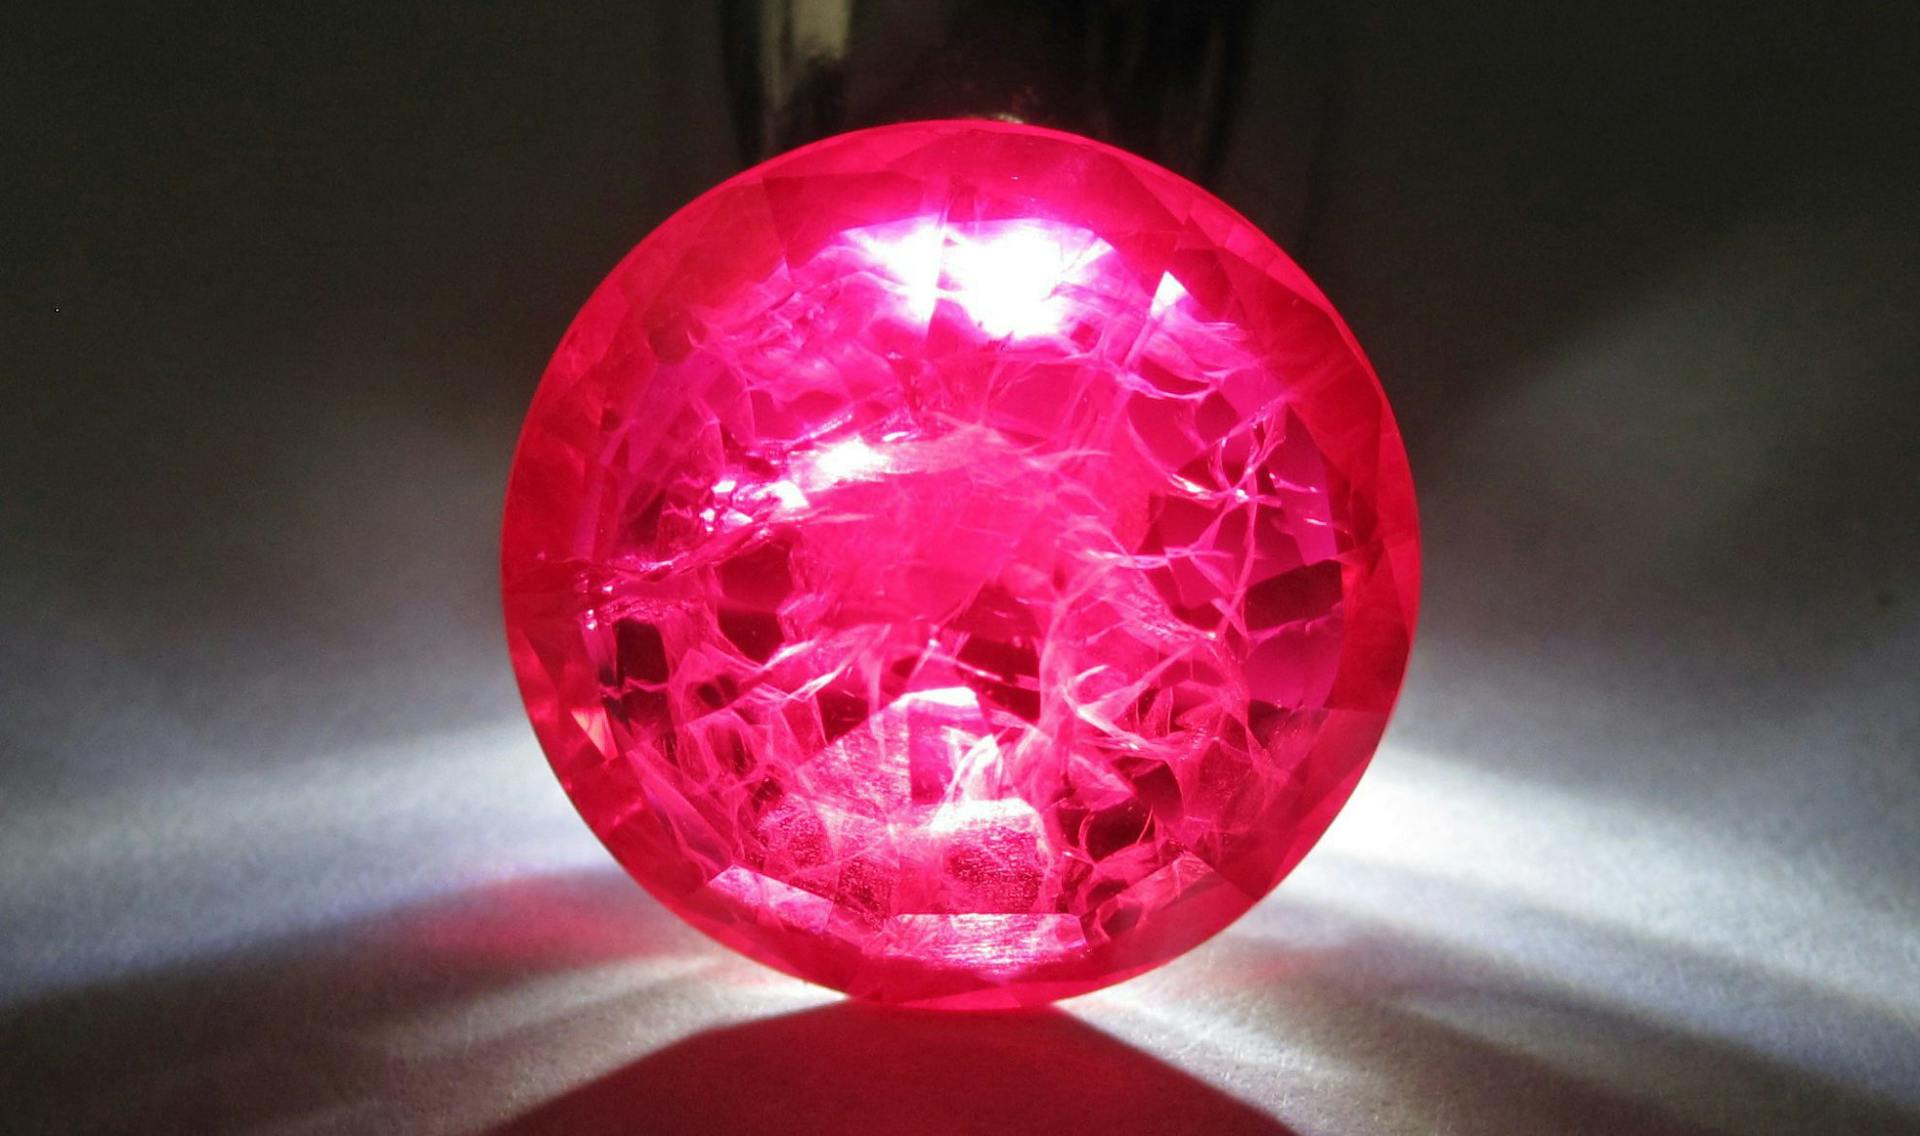 synthetic ruby